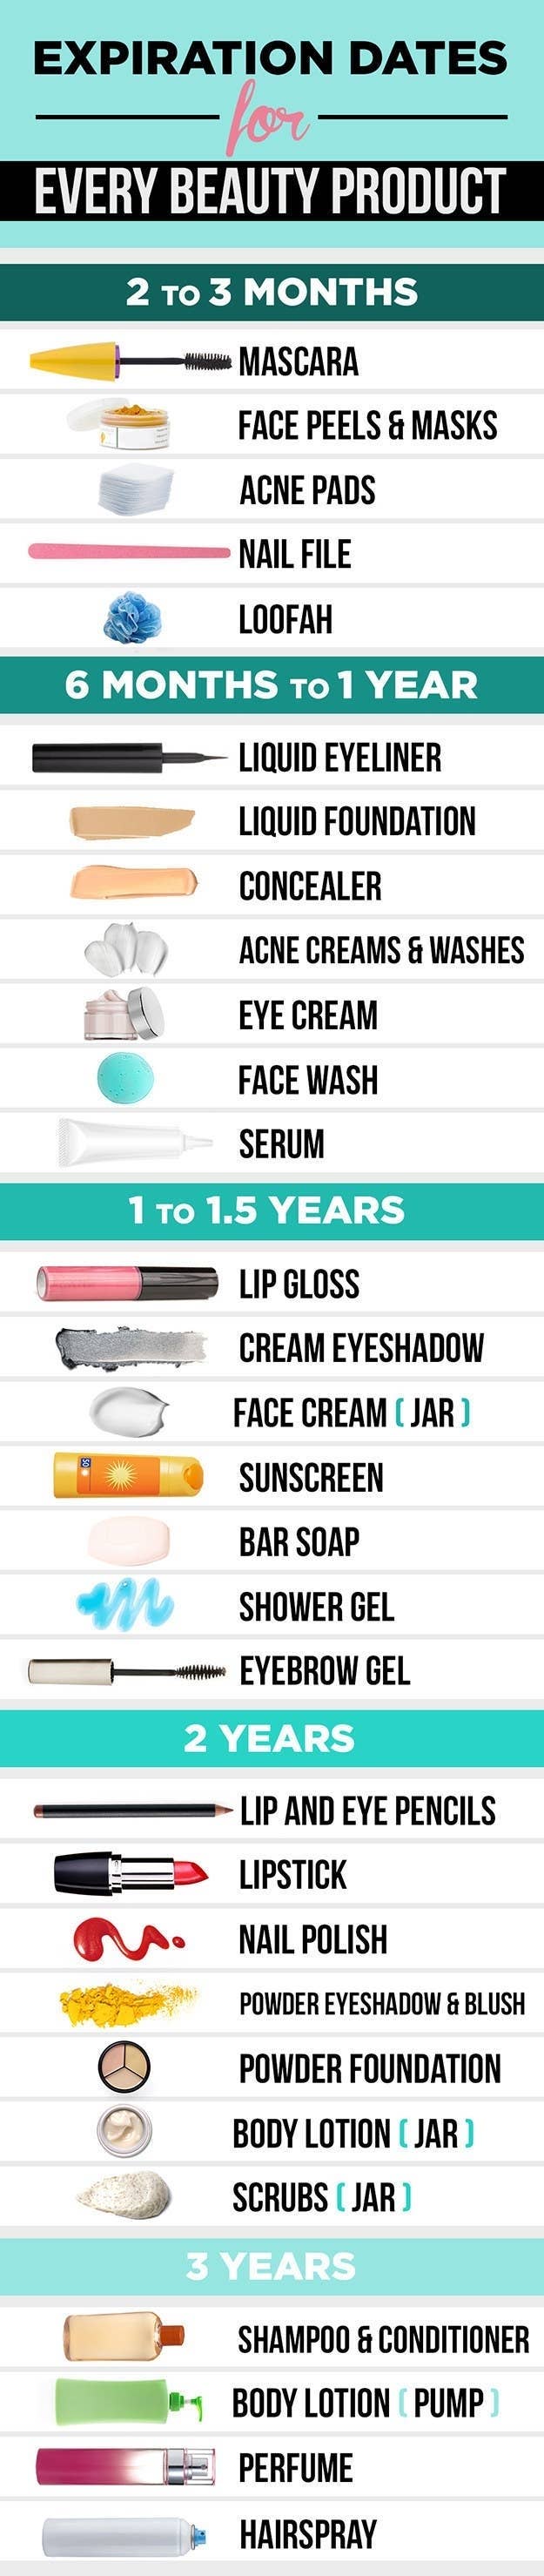 Guide on expiration dates for various beauty products ranging from 3 months to 2+ years. Recaps when to replace items like mascara to perfume